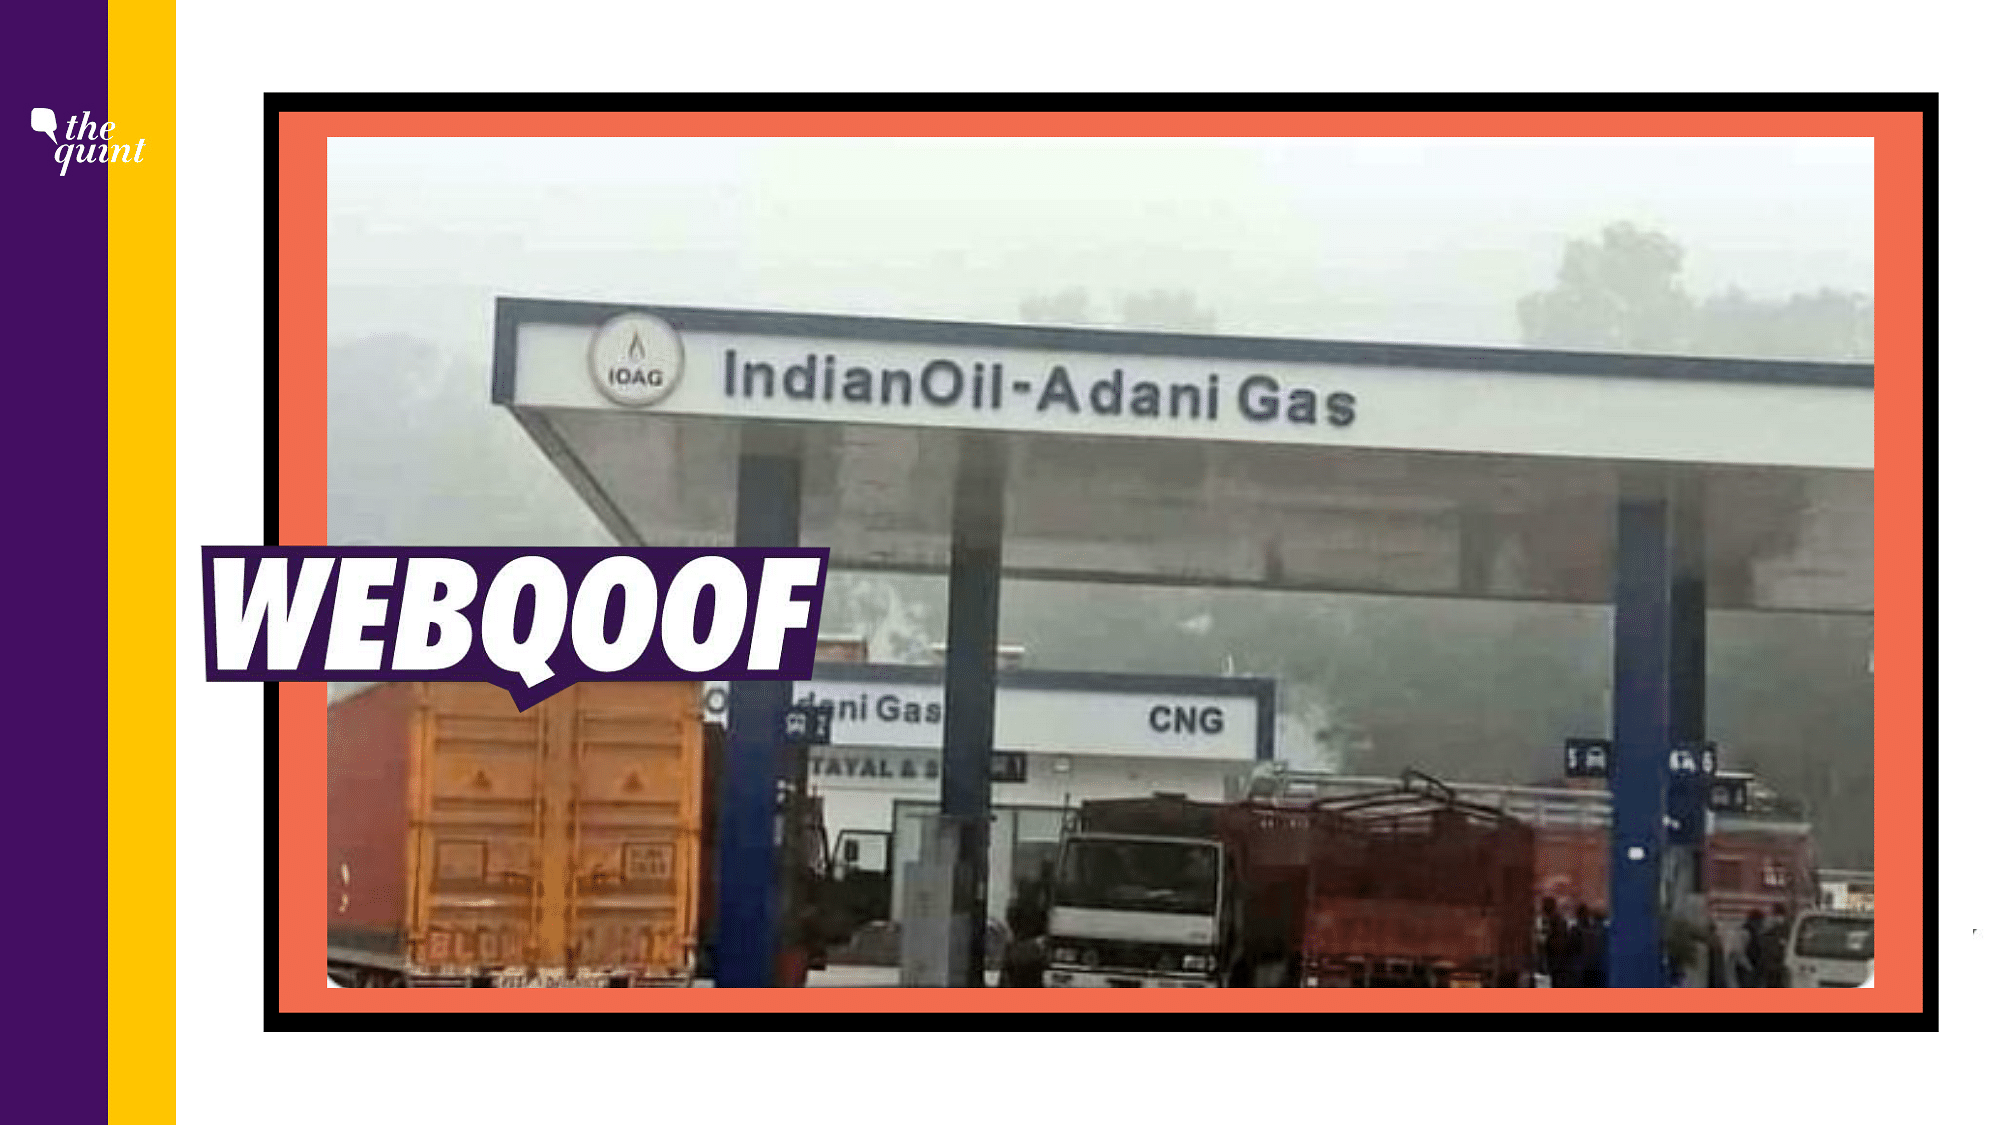 We found that Indian Oil-Adani Gas Private Ltd is a joint venture company of Indian Oil Corporation and Adani group.